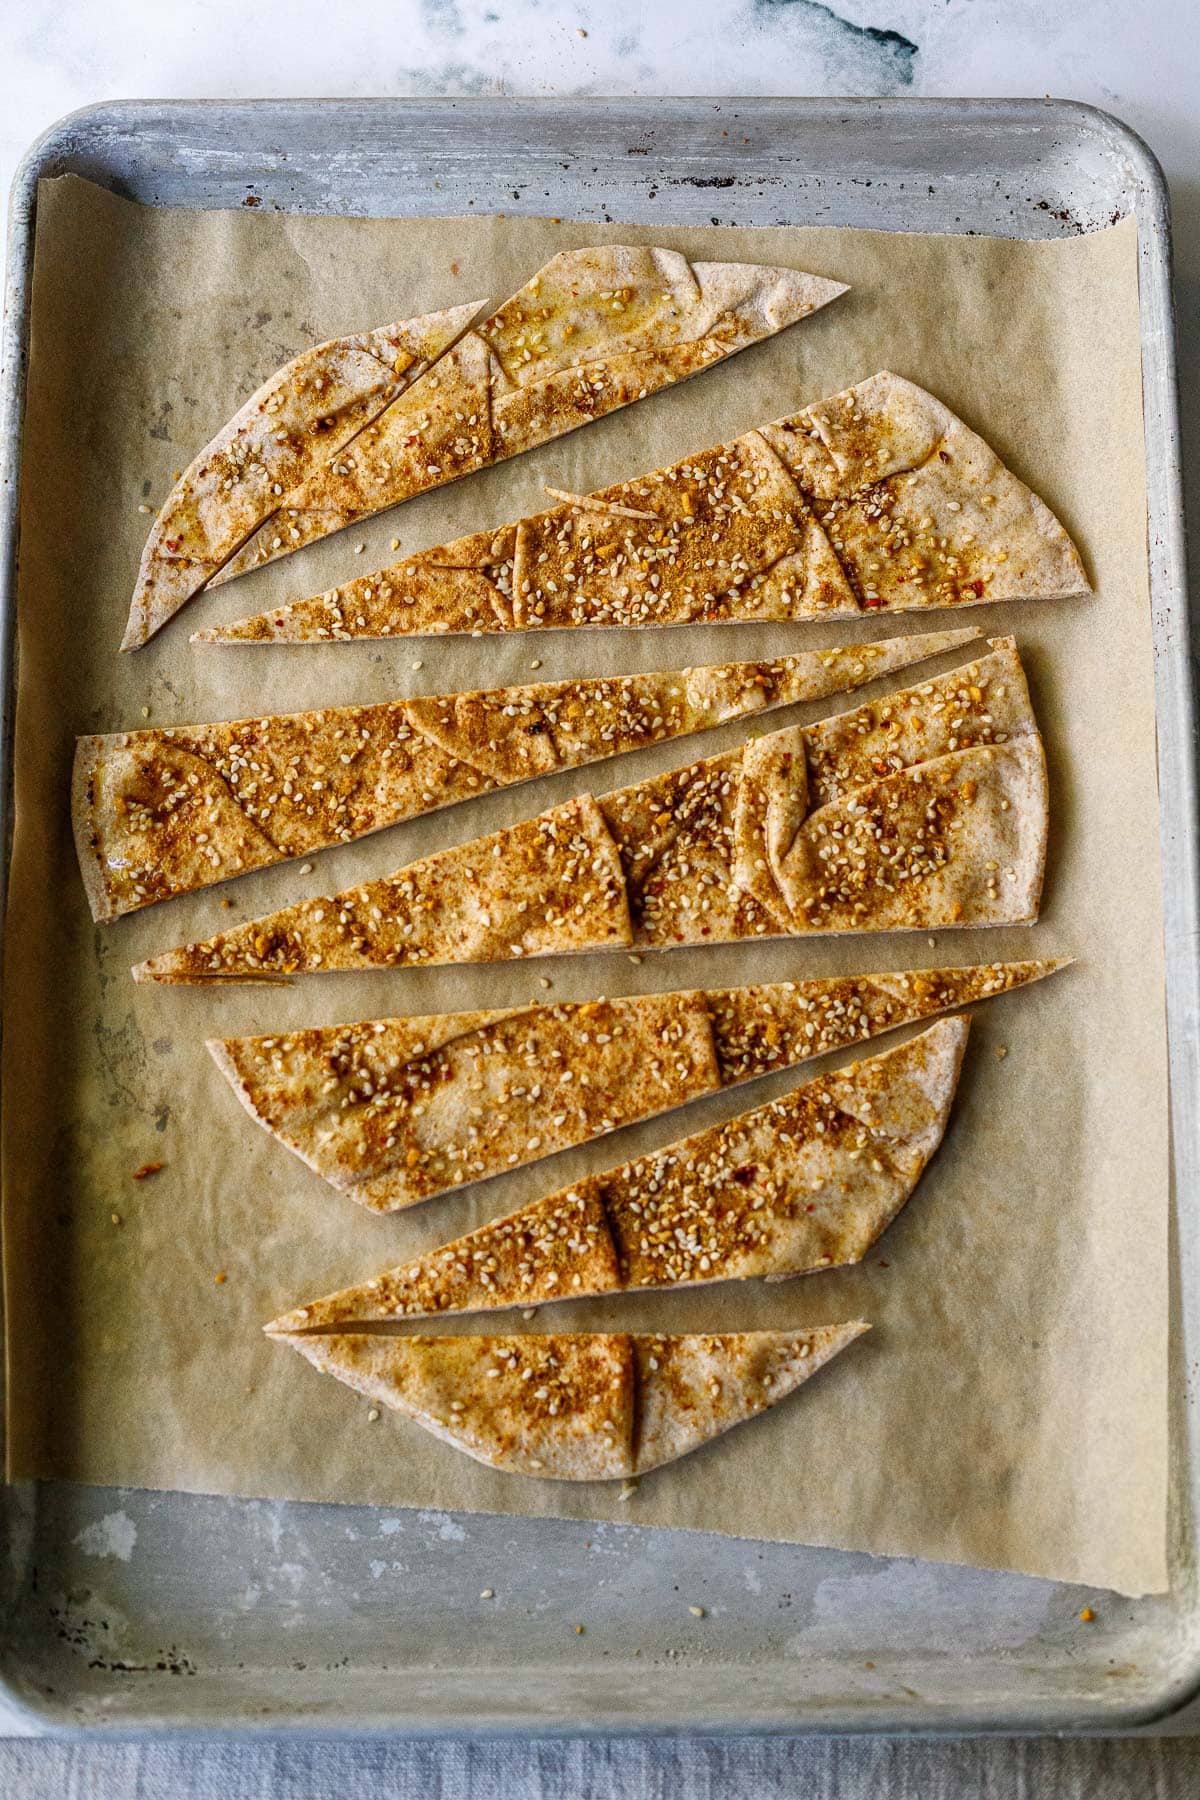 slices of pita bread with seasoning and sesame seeds on baking sheet